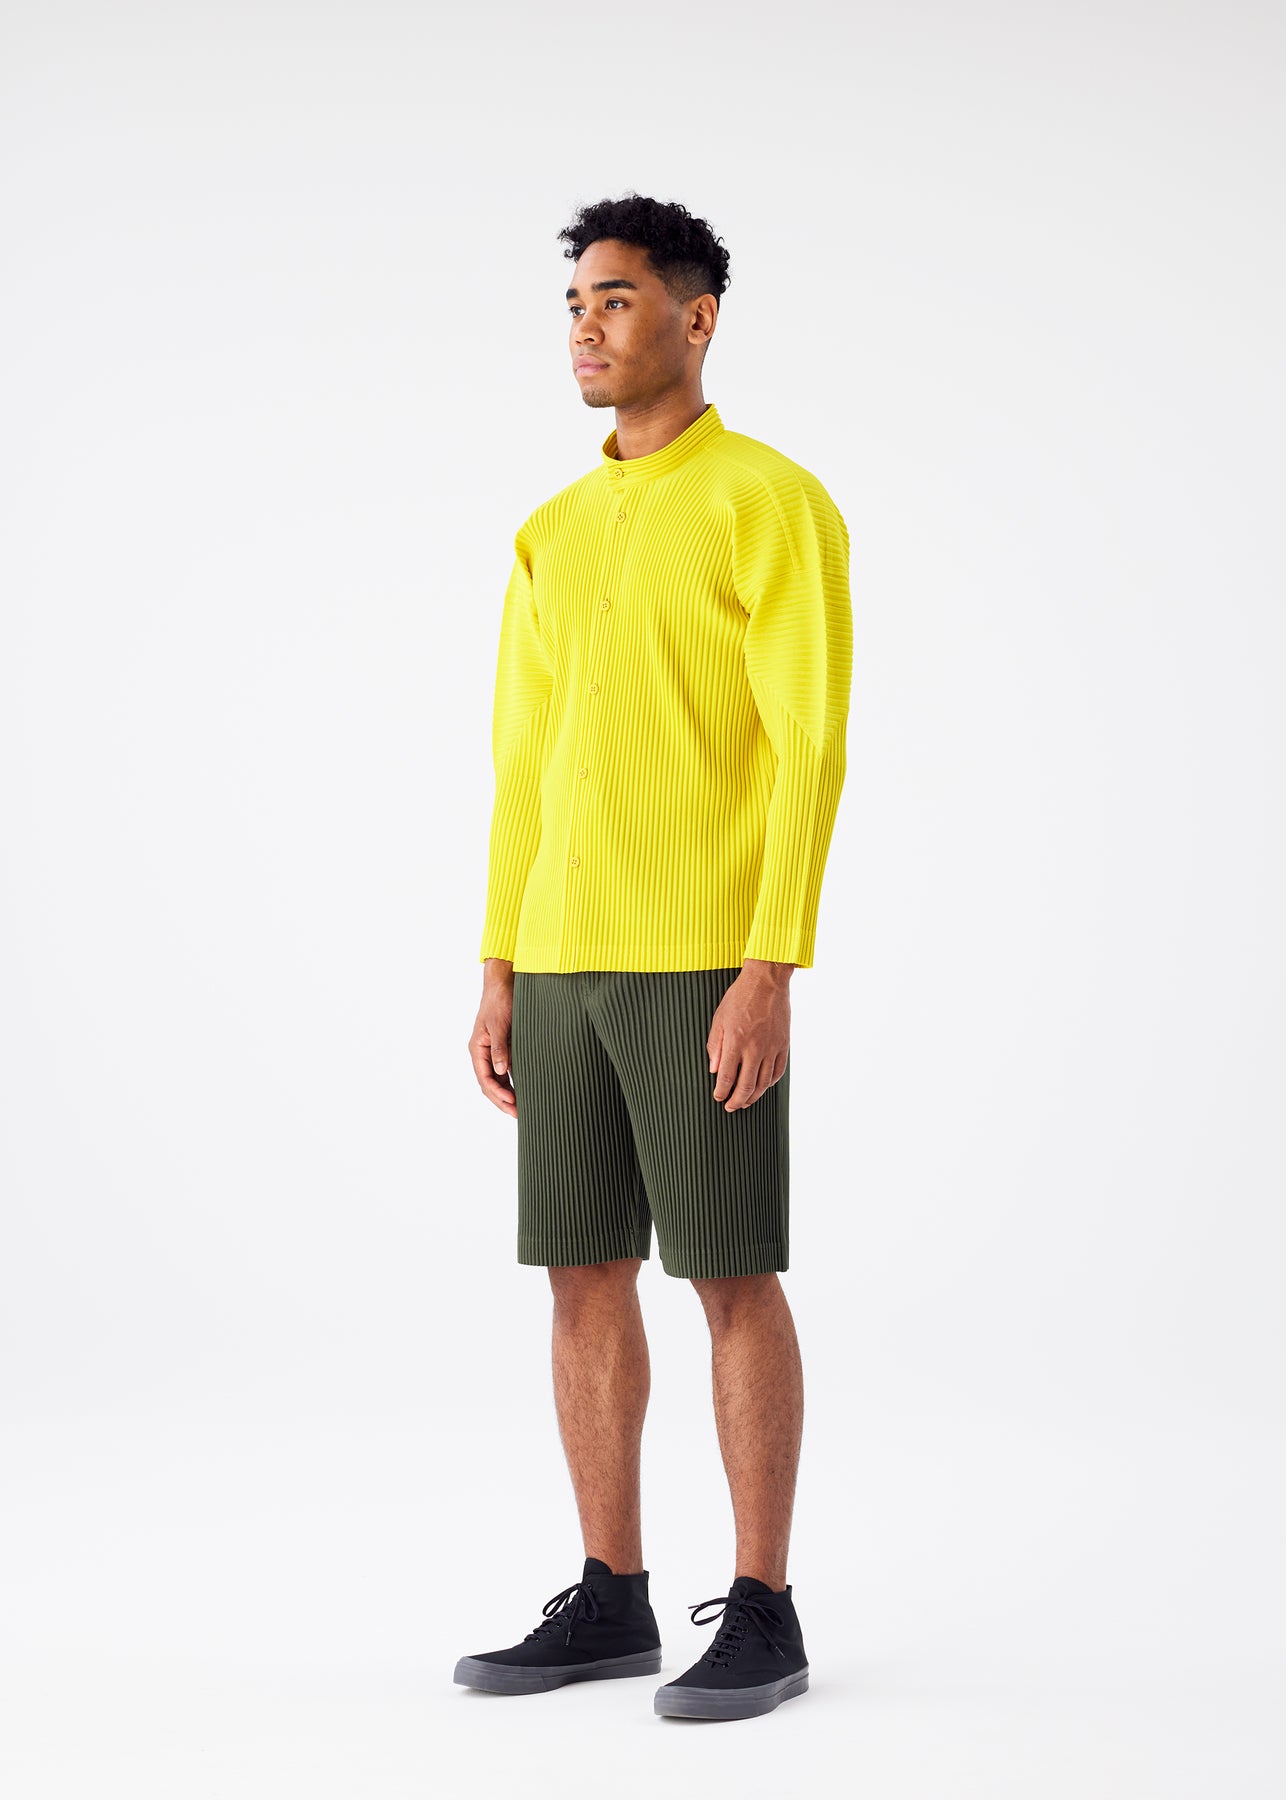 PLEATS BOTTOMS 2 SHORTS | The official ISSEY MIYAKE ONLINE STORE